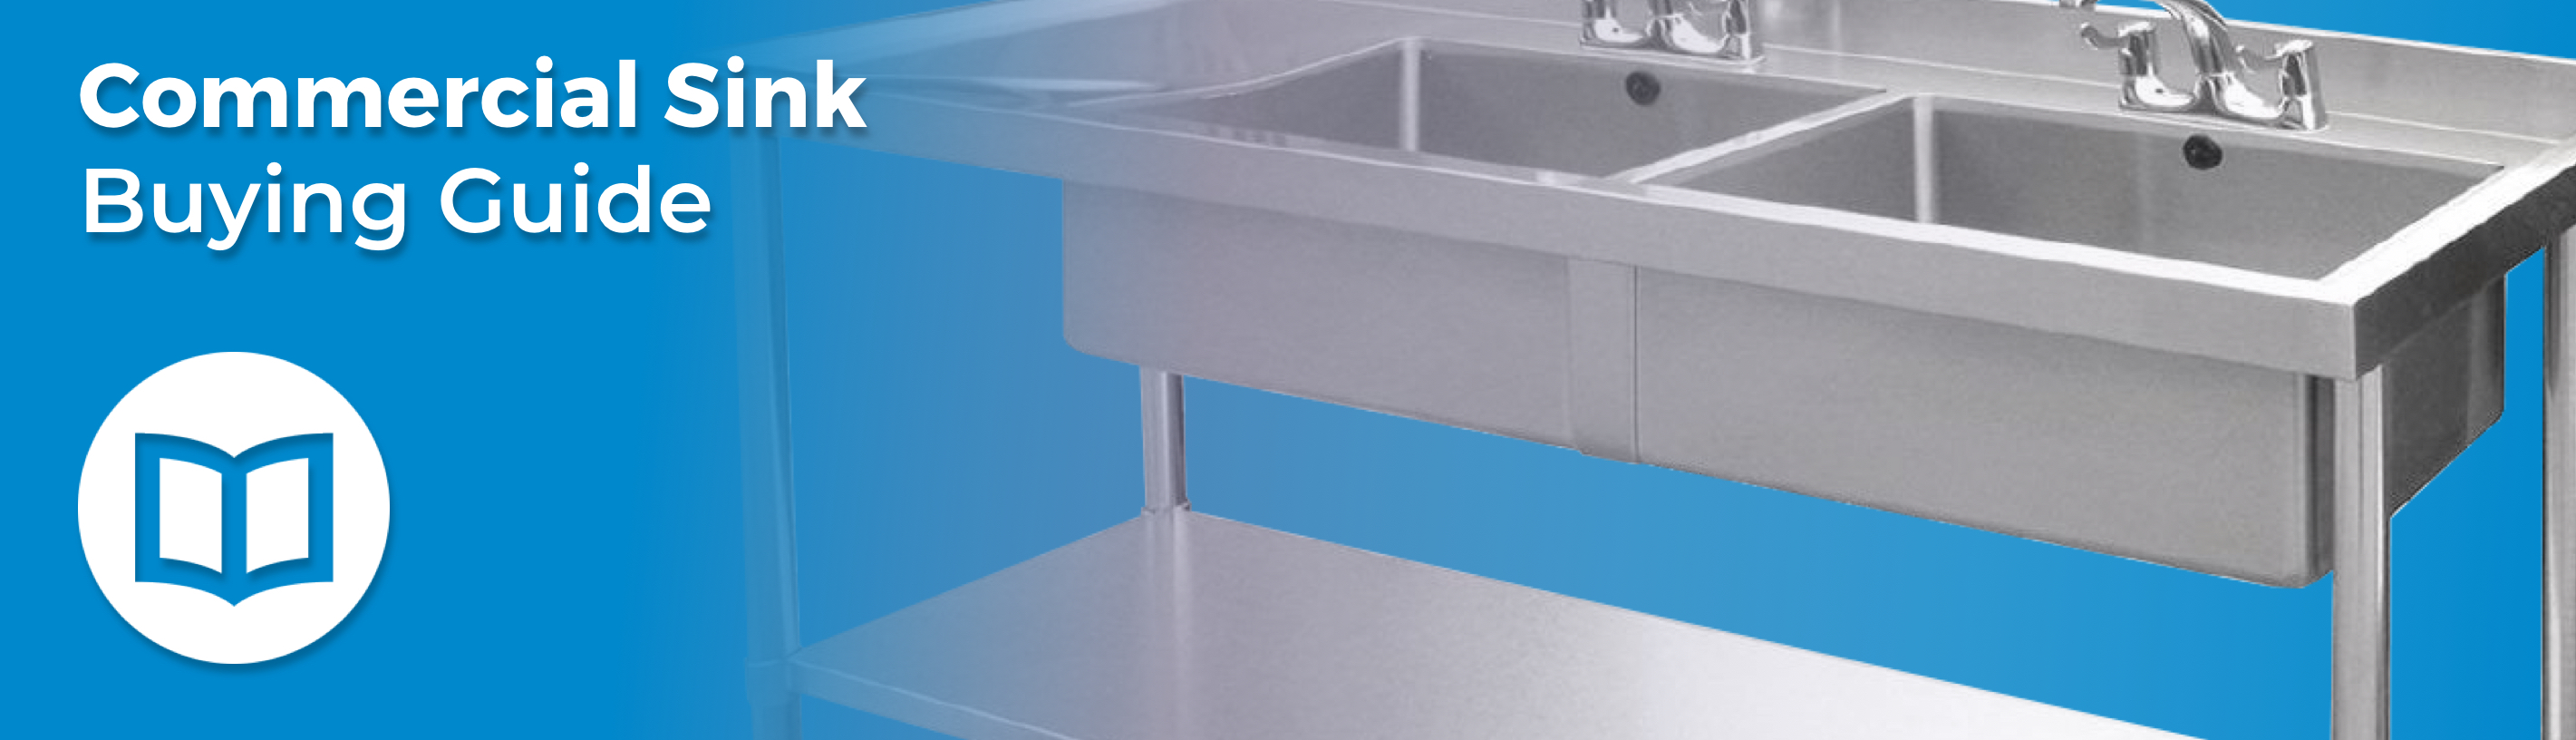 https://www.catering-appliance.com/images/buying-guides/commercial-sink.jpg